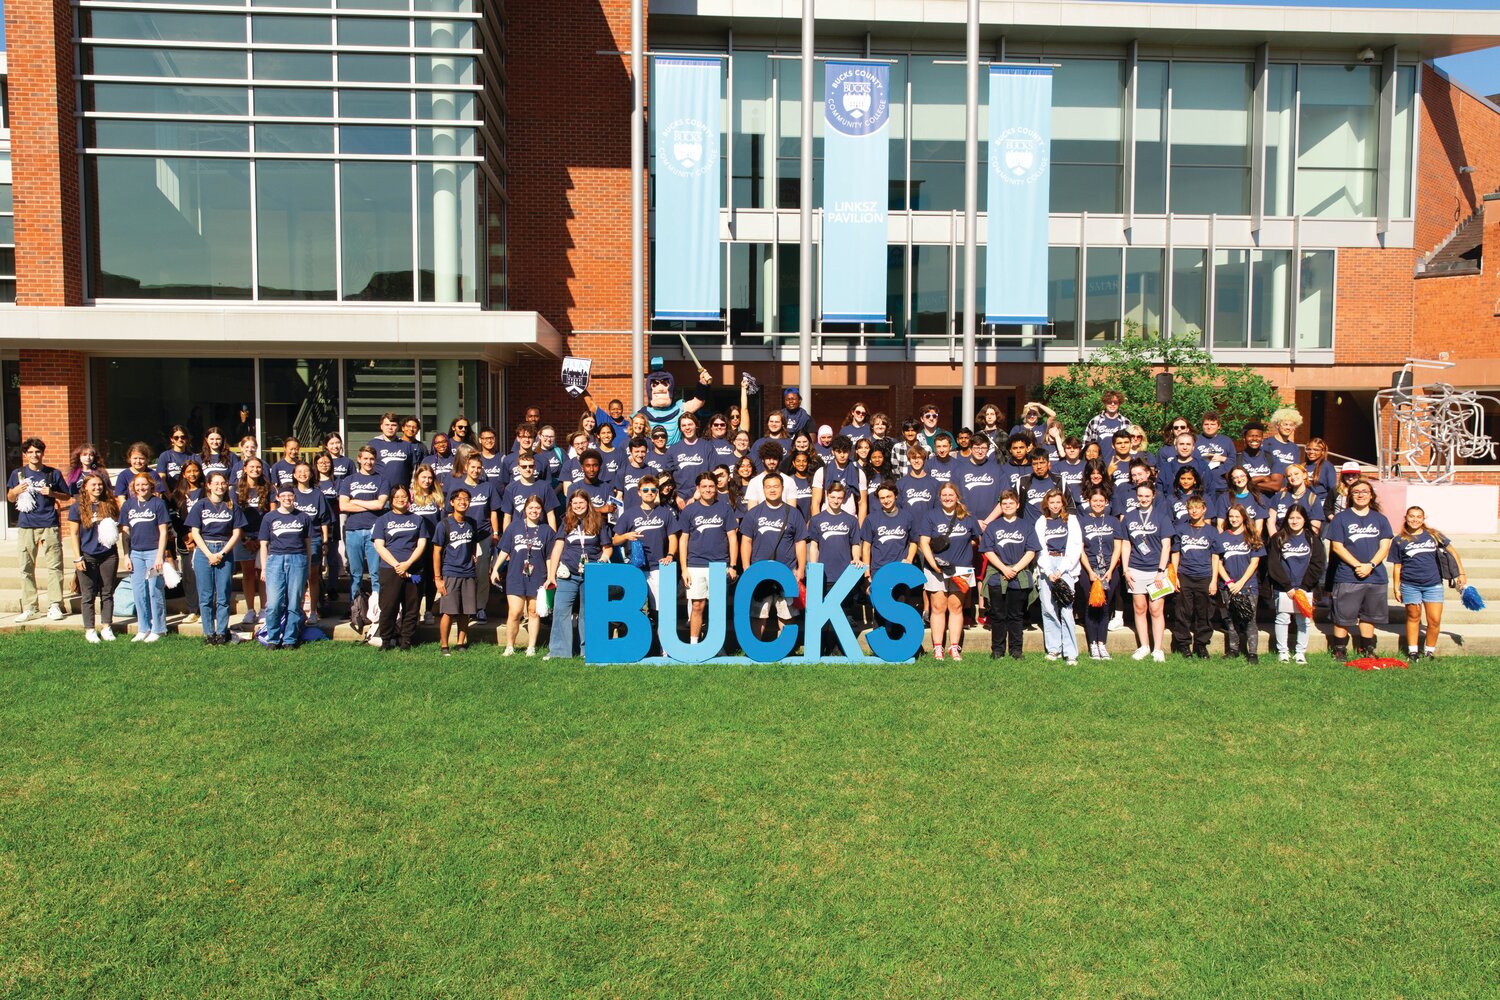 Some of this fall’s new students gather on the quad along with President Dr. Felicia Ganther (back row) to celebrate the start of their academic journeys at Bucks County Community College’s Newtown Campus.